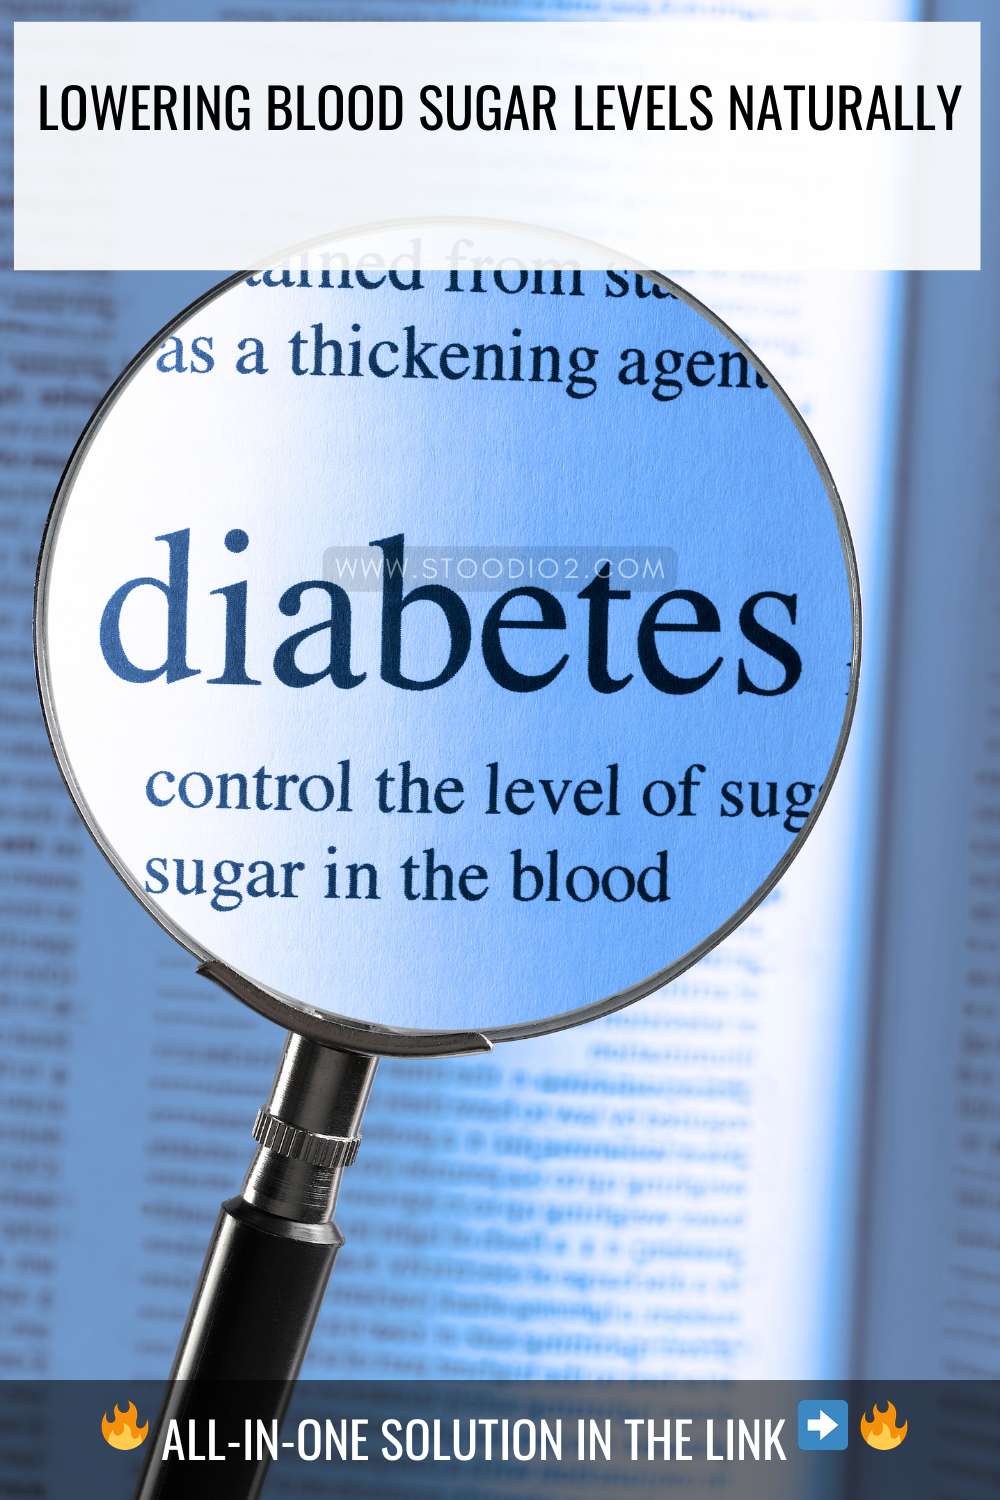 Lowering Blood Sugar Levels Naturally